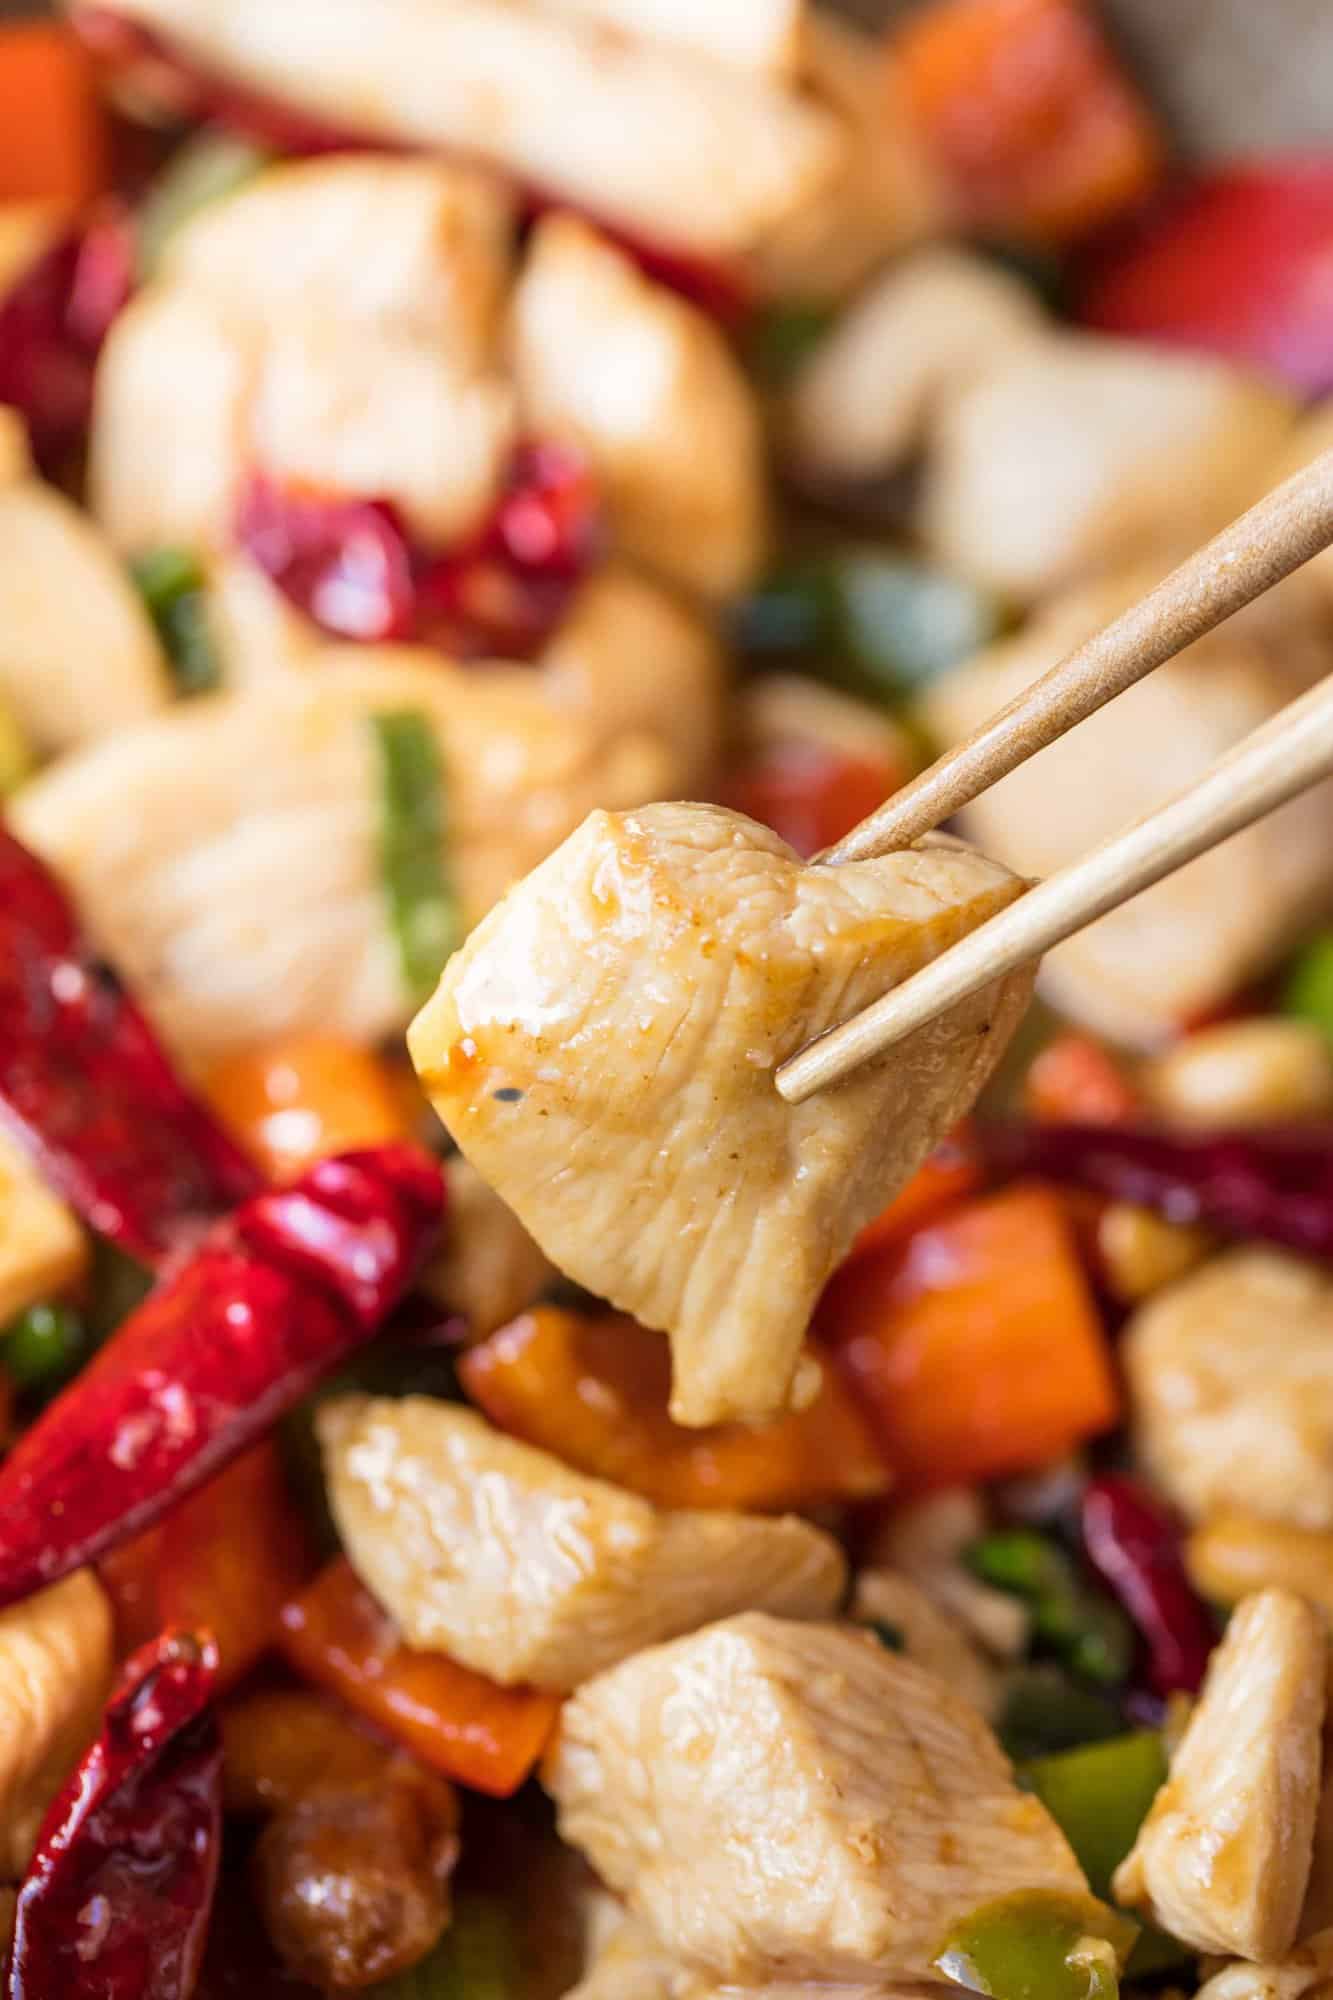 Chopsticks holding a piece of Kung Pao chicken over a bowl full of Kung Pao chicken